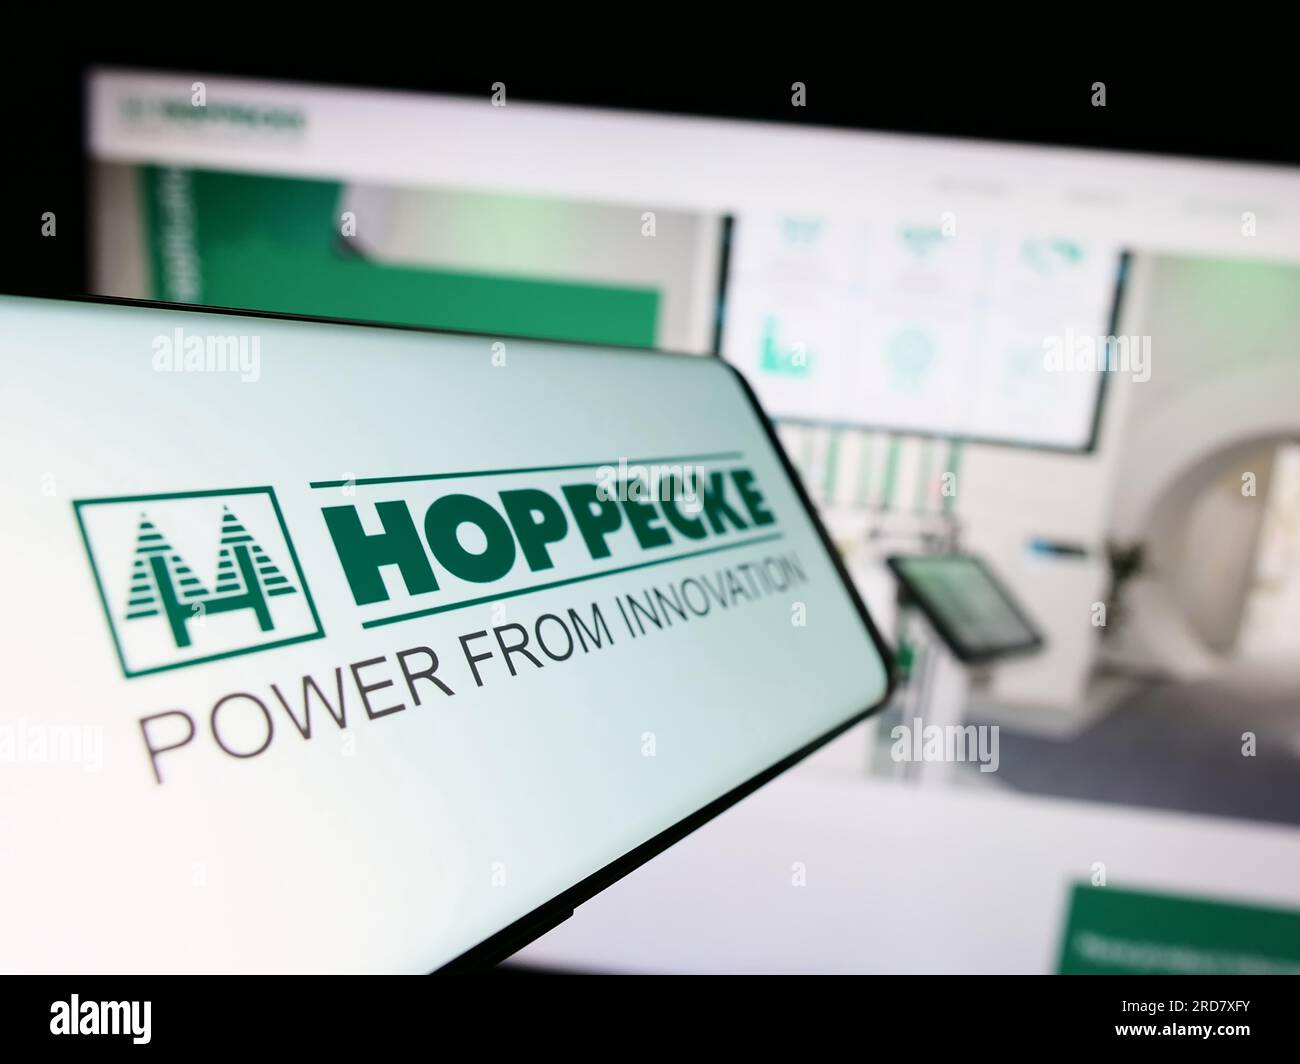 Cellphone with logo of German company Accumulatorenwerke Hoppecke on screen in front of business website. Focus on center-left of phone display. Stock Photo